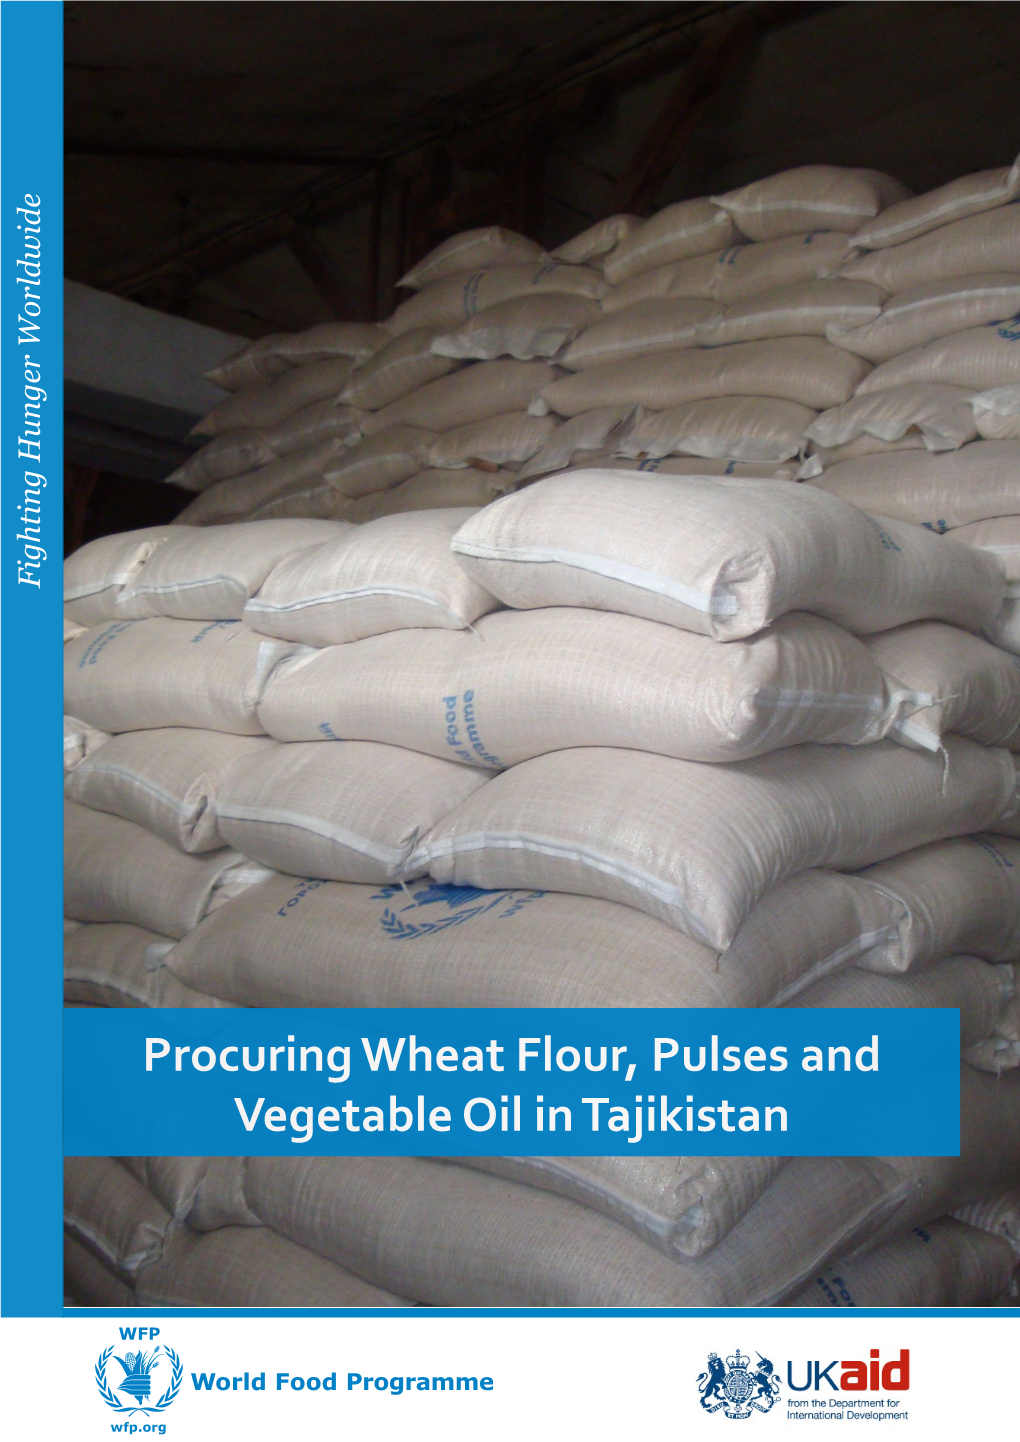 Procuring Wheat Flour, Pulses and Vegetable Oil in Tajikistan